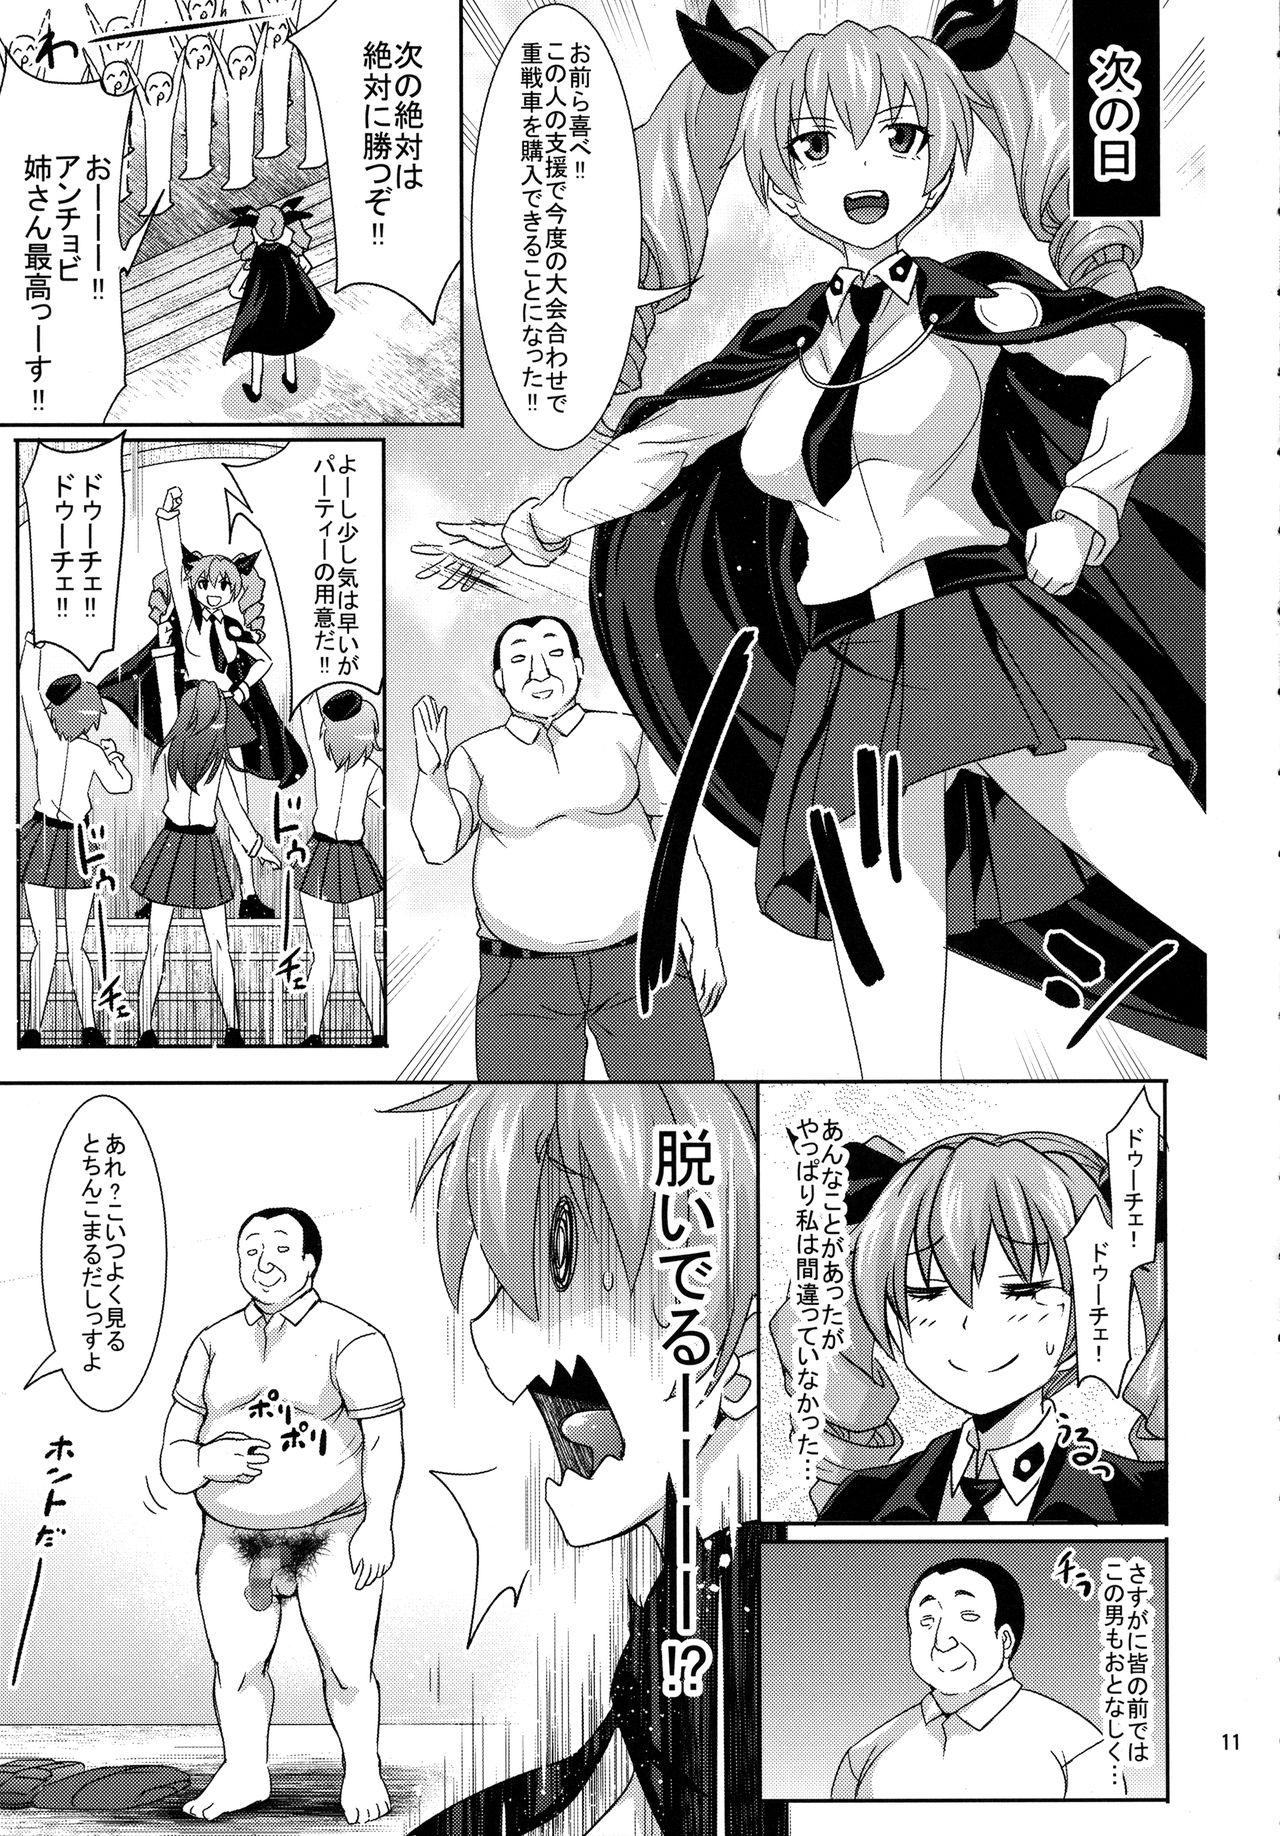 Hot Milf Anchovy to Duce! Duce! - Girls und panzer Lolicon - Page 10